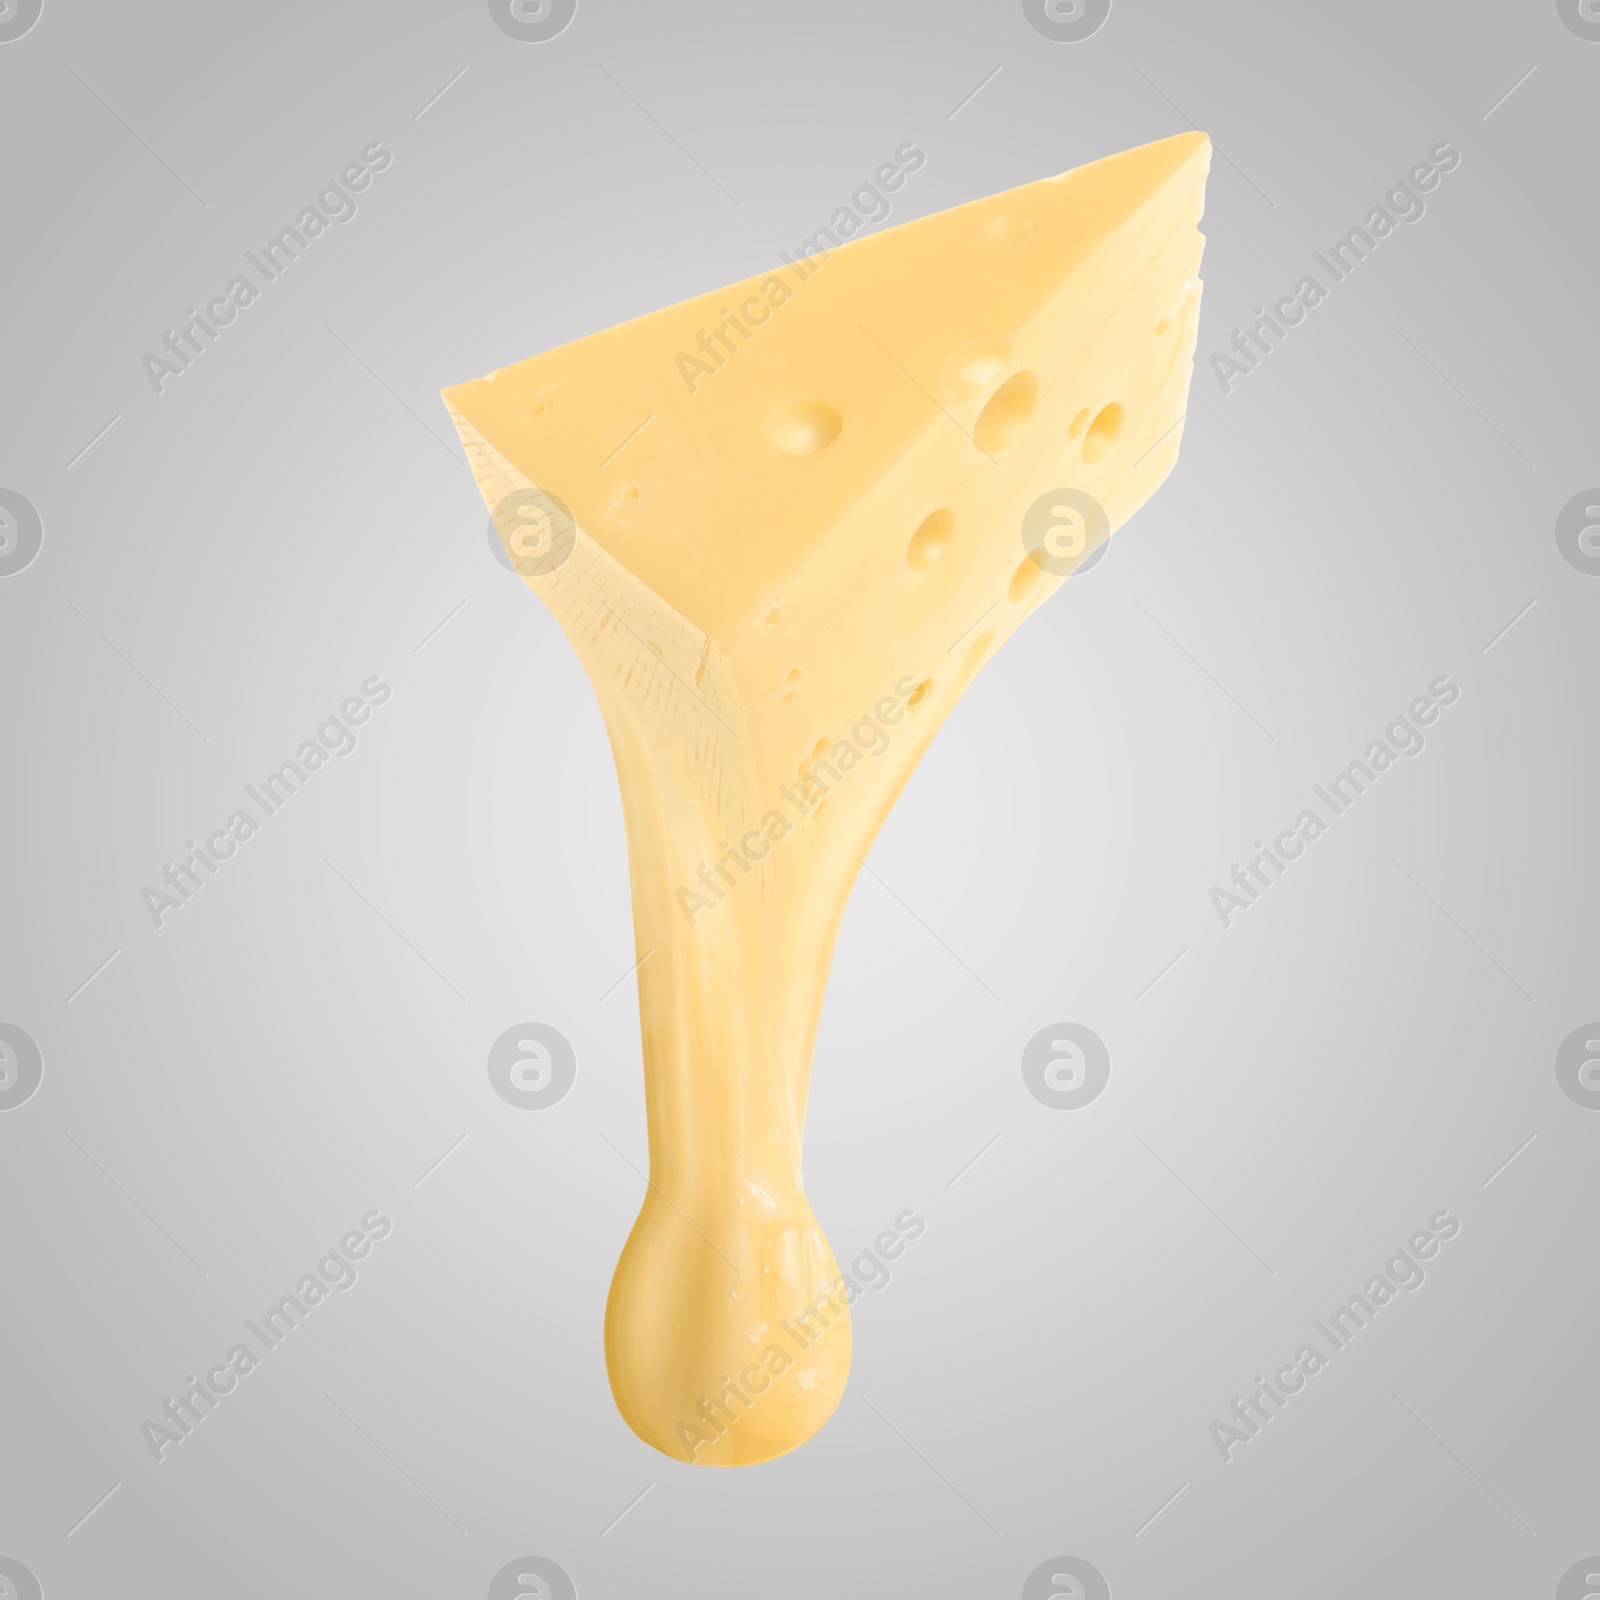 Image of Tasty cheese stretching in air on grey background